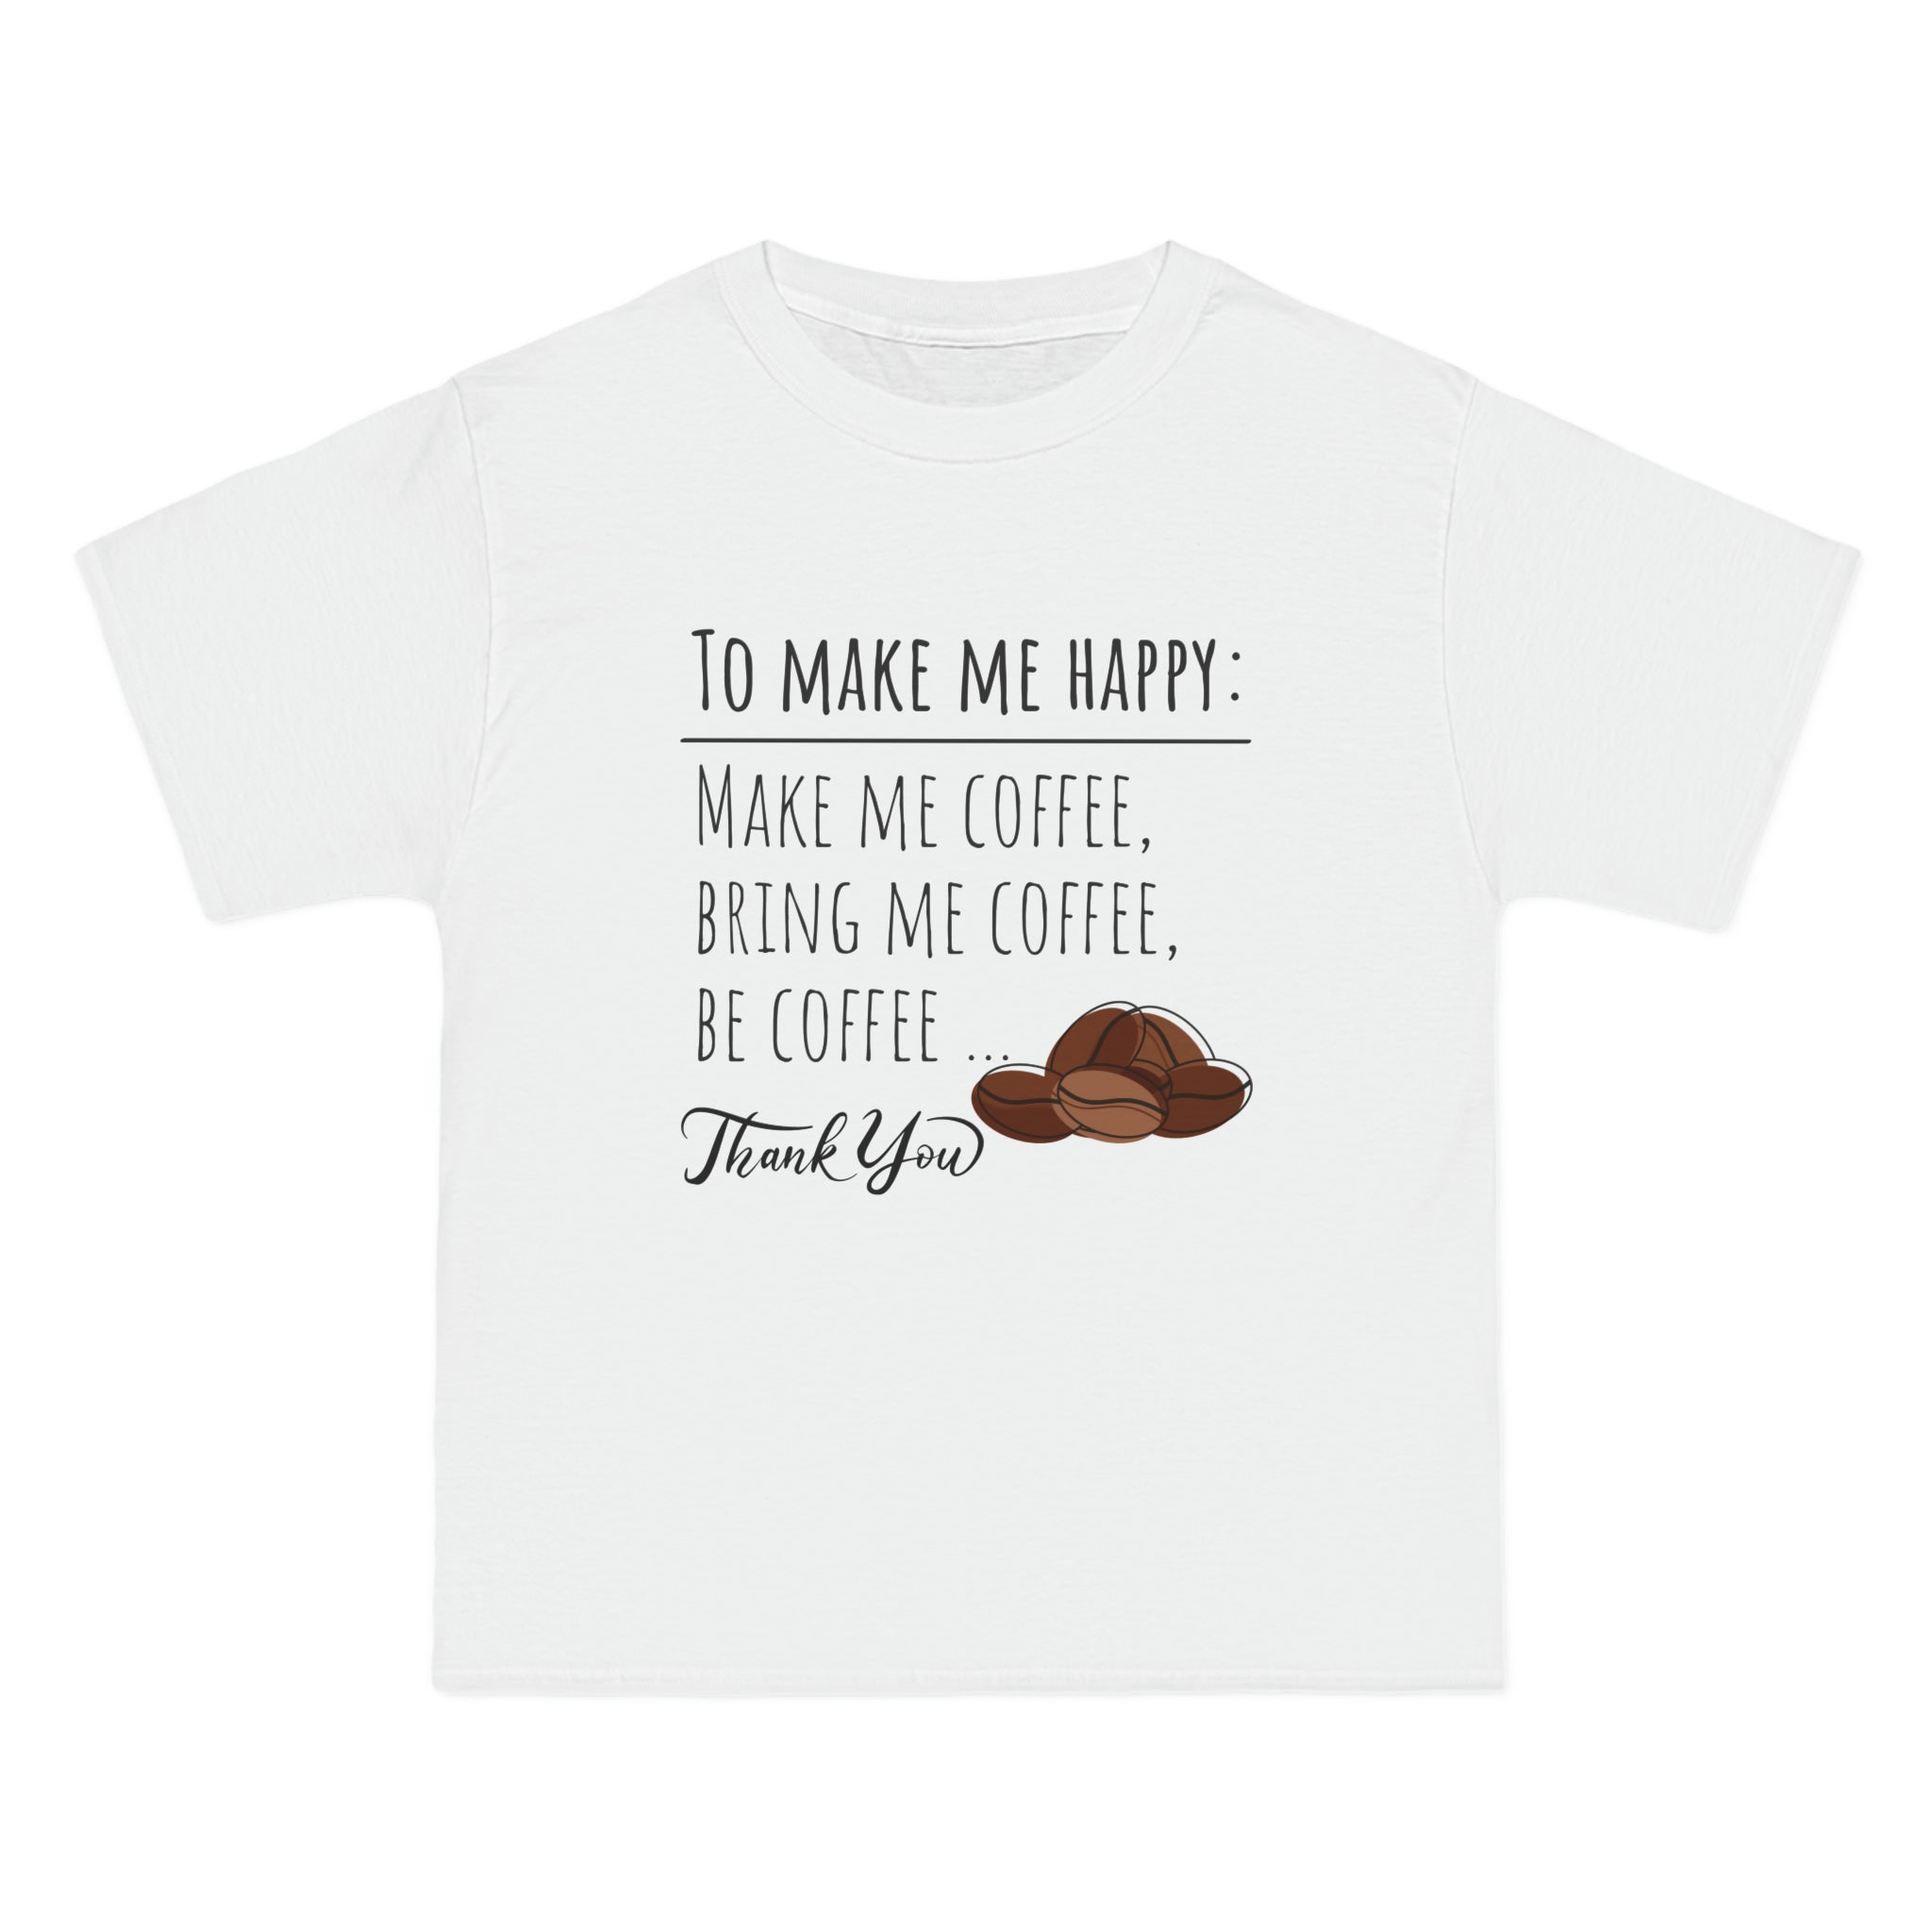 Be the talk of the Coffee Shop. Coffee Lover's T-Shirt - 'To Make me Happy Bring Coffee...' - Comfortable Short-Sleeve Tee Shirt Gift for Coffee Drinkers Shirt for Casual Friday's